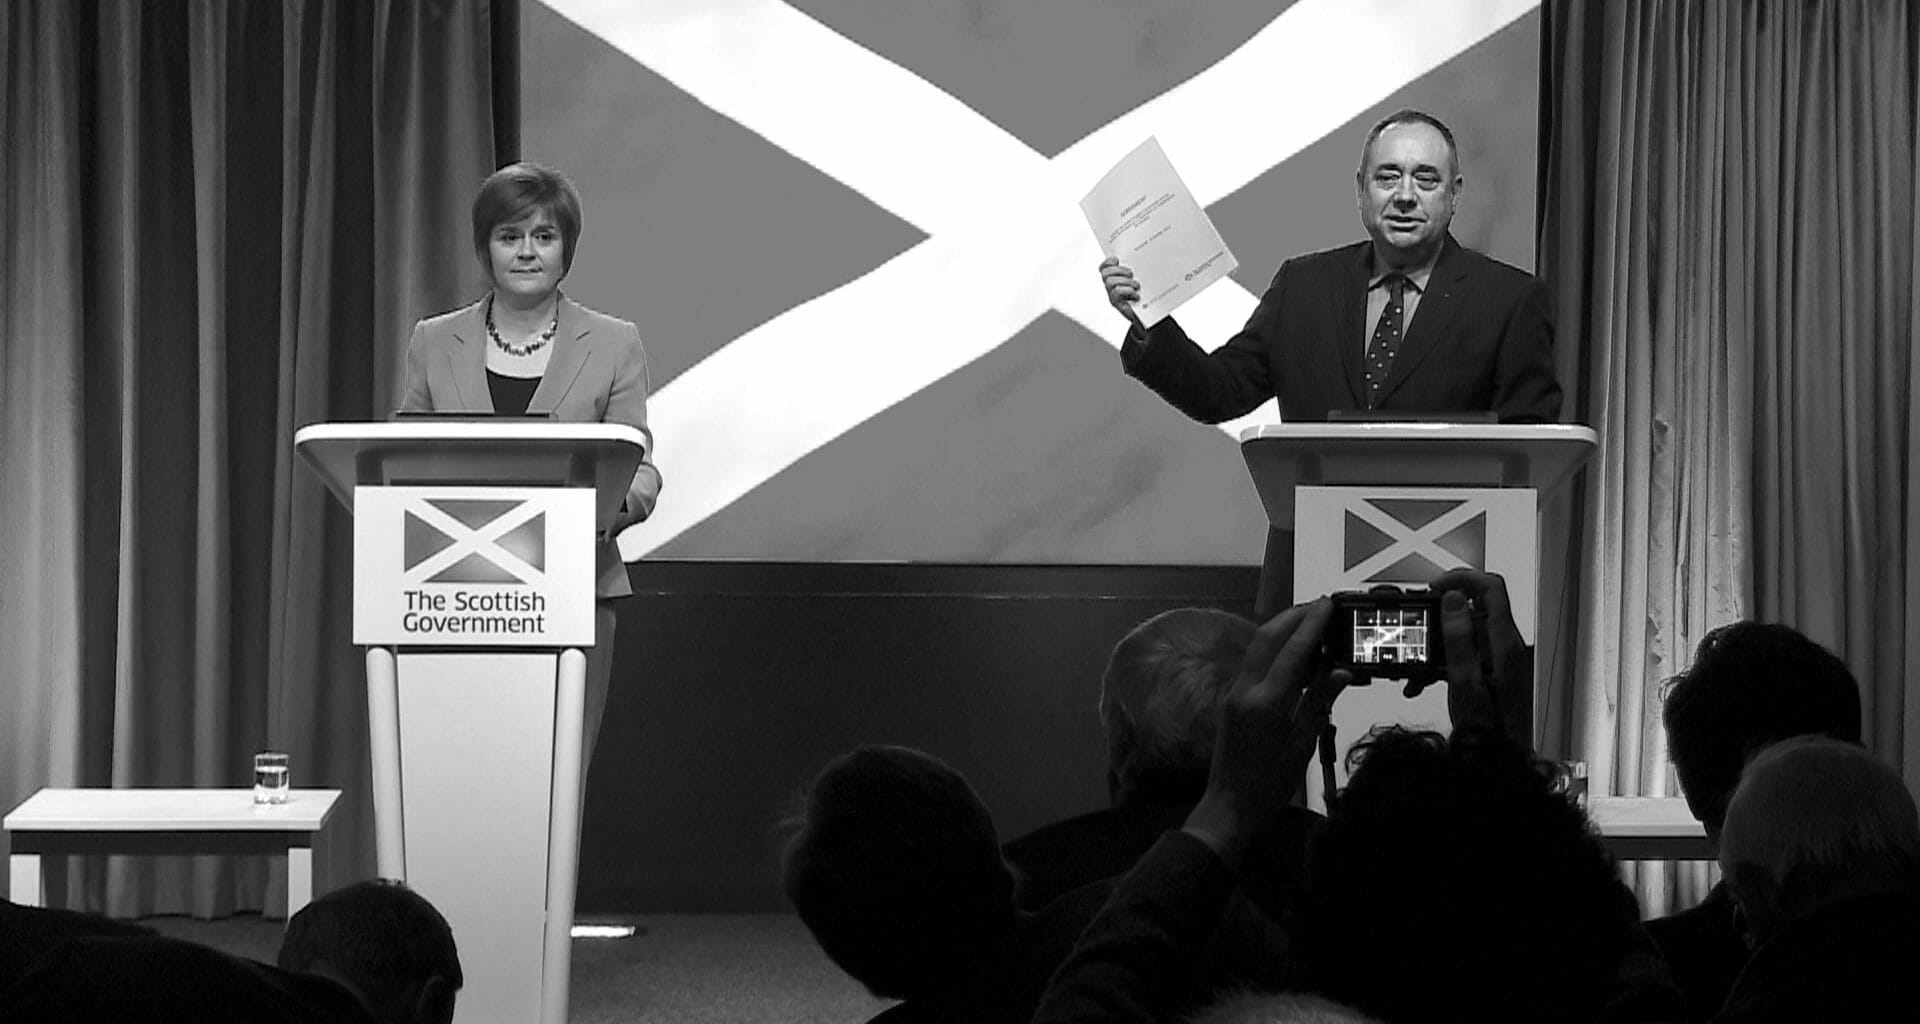 FFS explains: Alex Salmond's committee appearance 3